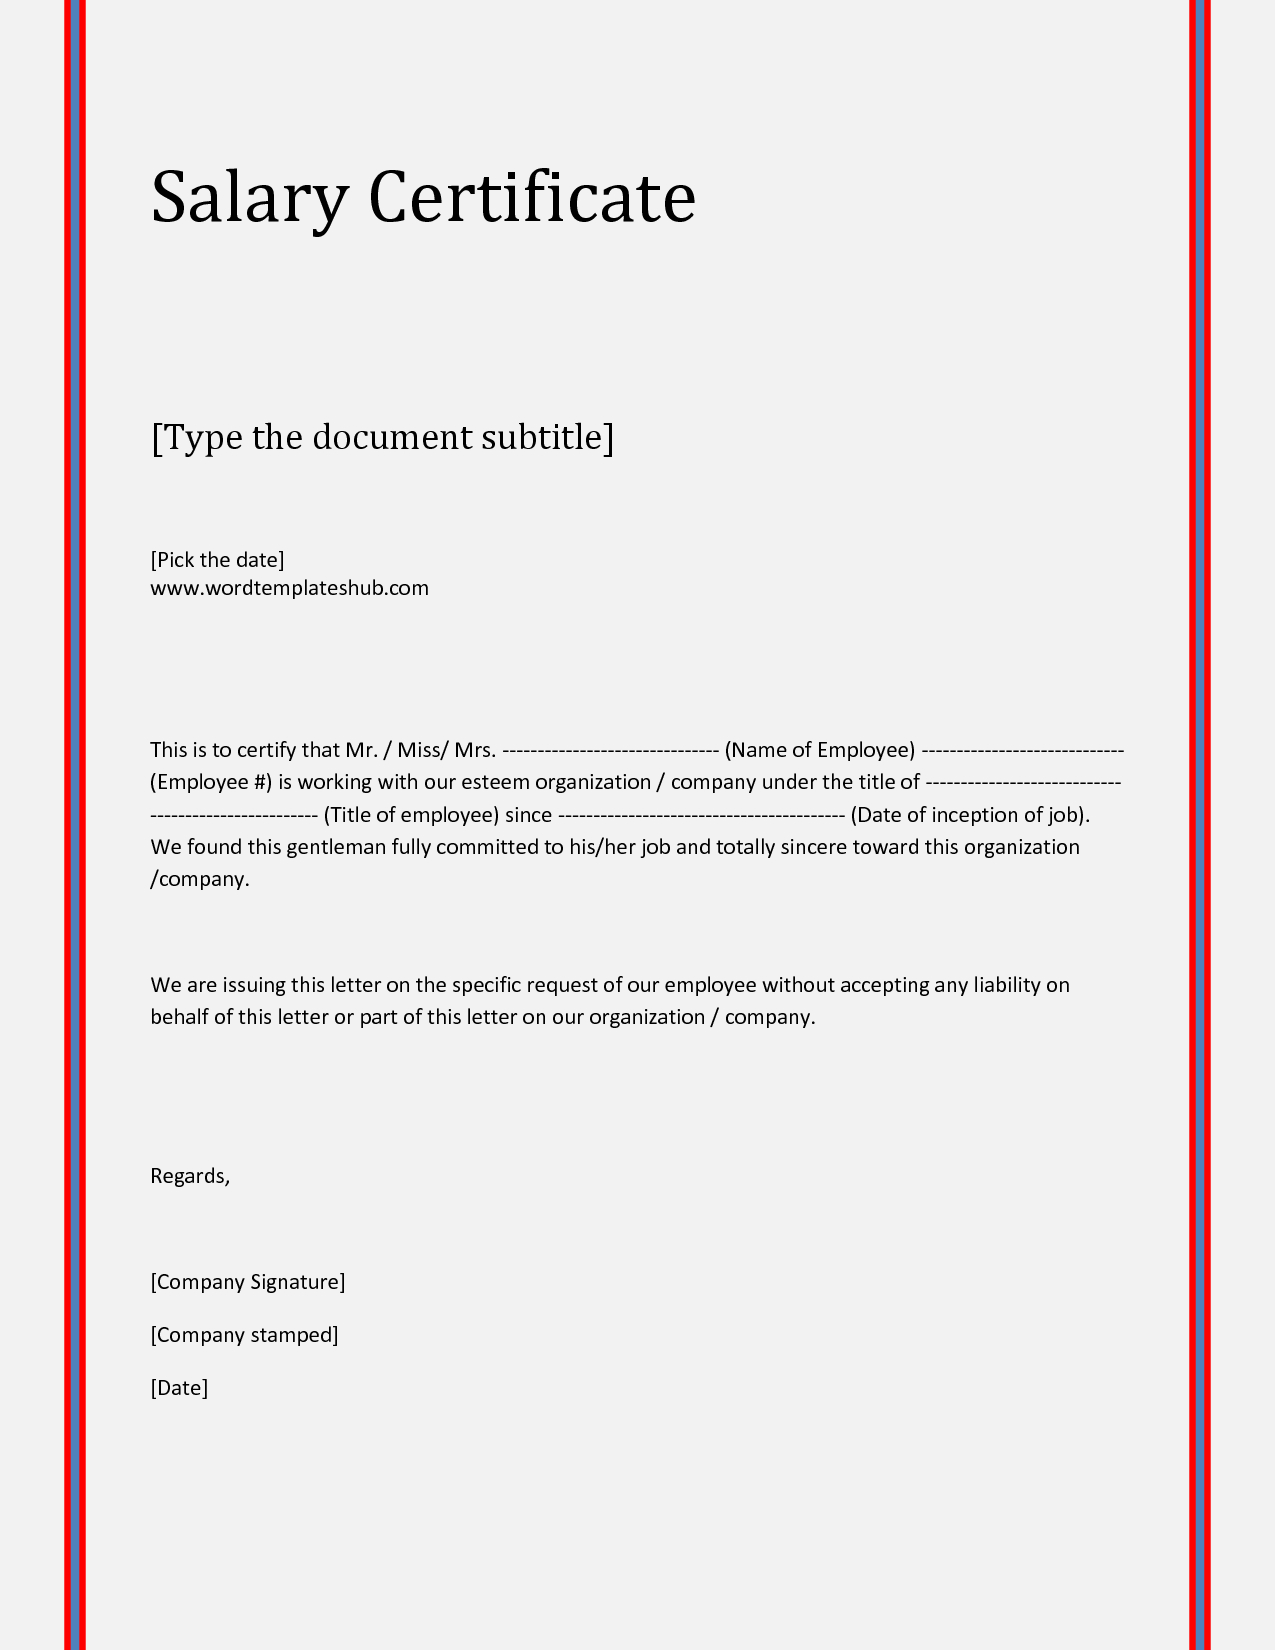 Request Letter For Certificate Employment Nurses Cover Proof In Template Of Certificate Of Employment